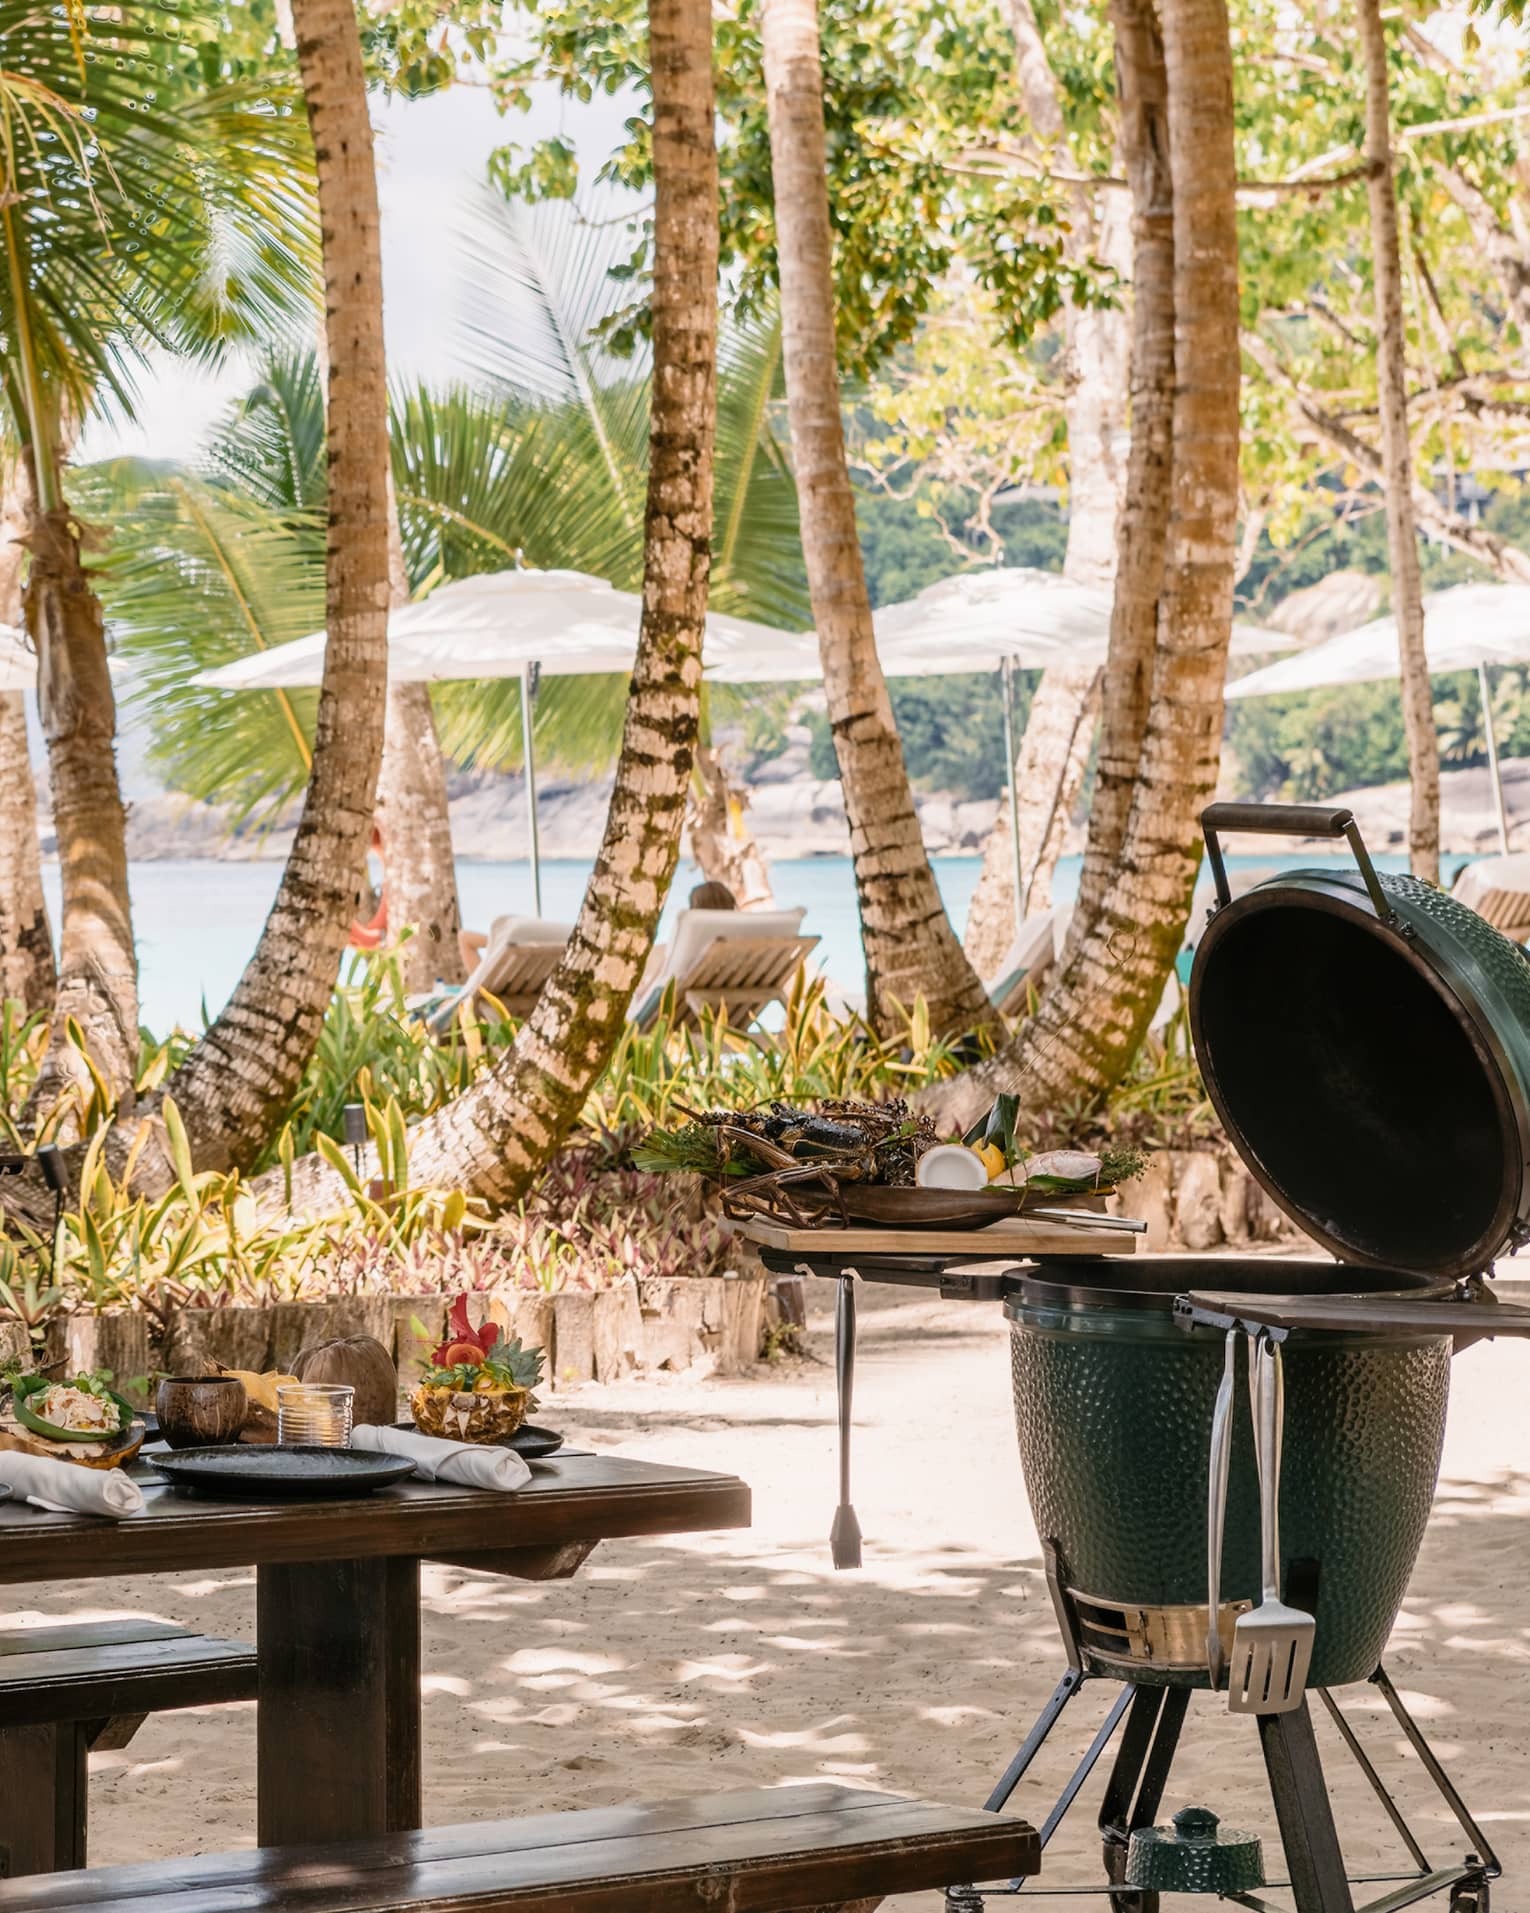 BBQ and grill equipment outside near a table and palm trees.